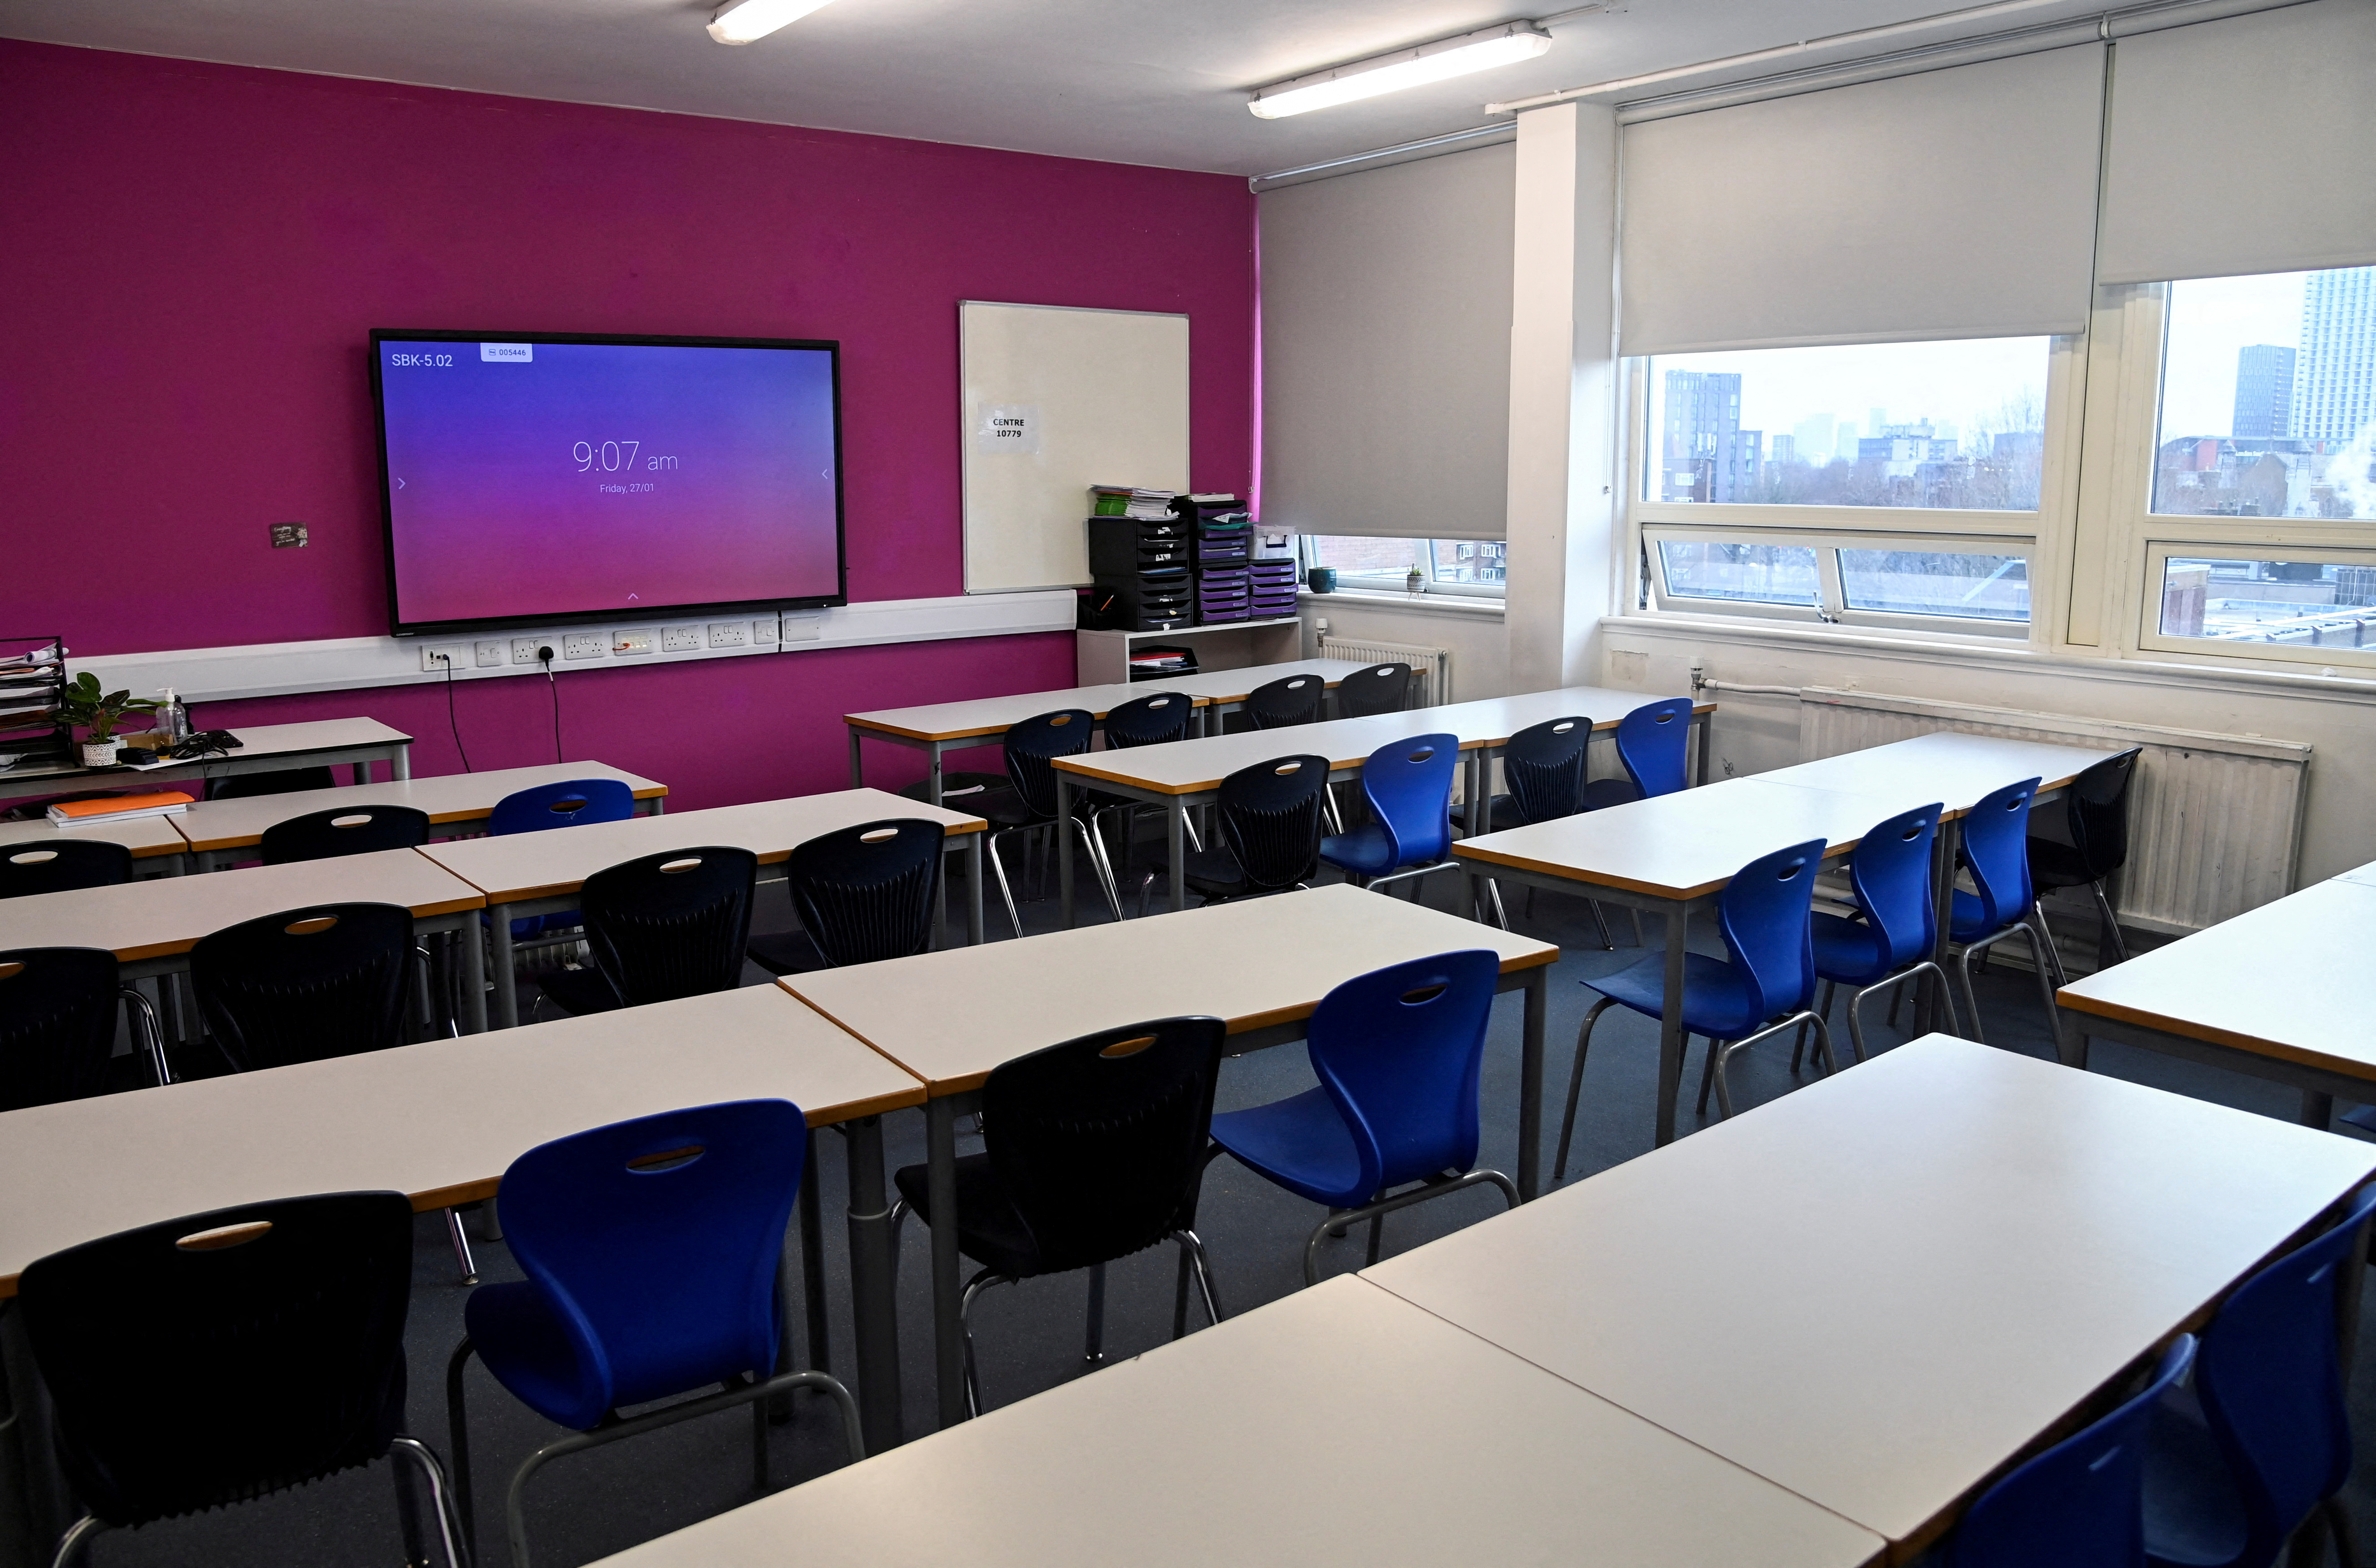 A general view of a classroom at Oasis Academy South Bank, ahead of expected teacher strikes, in London